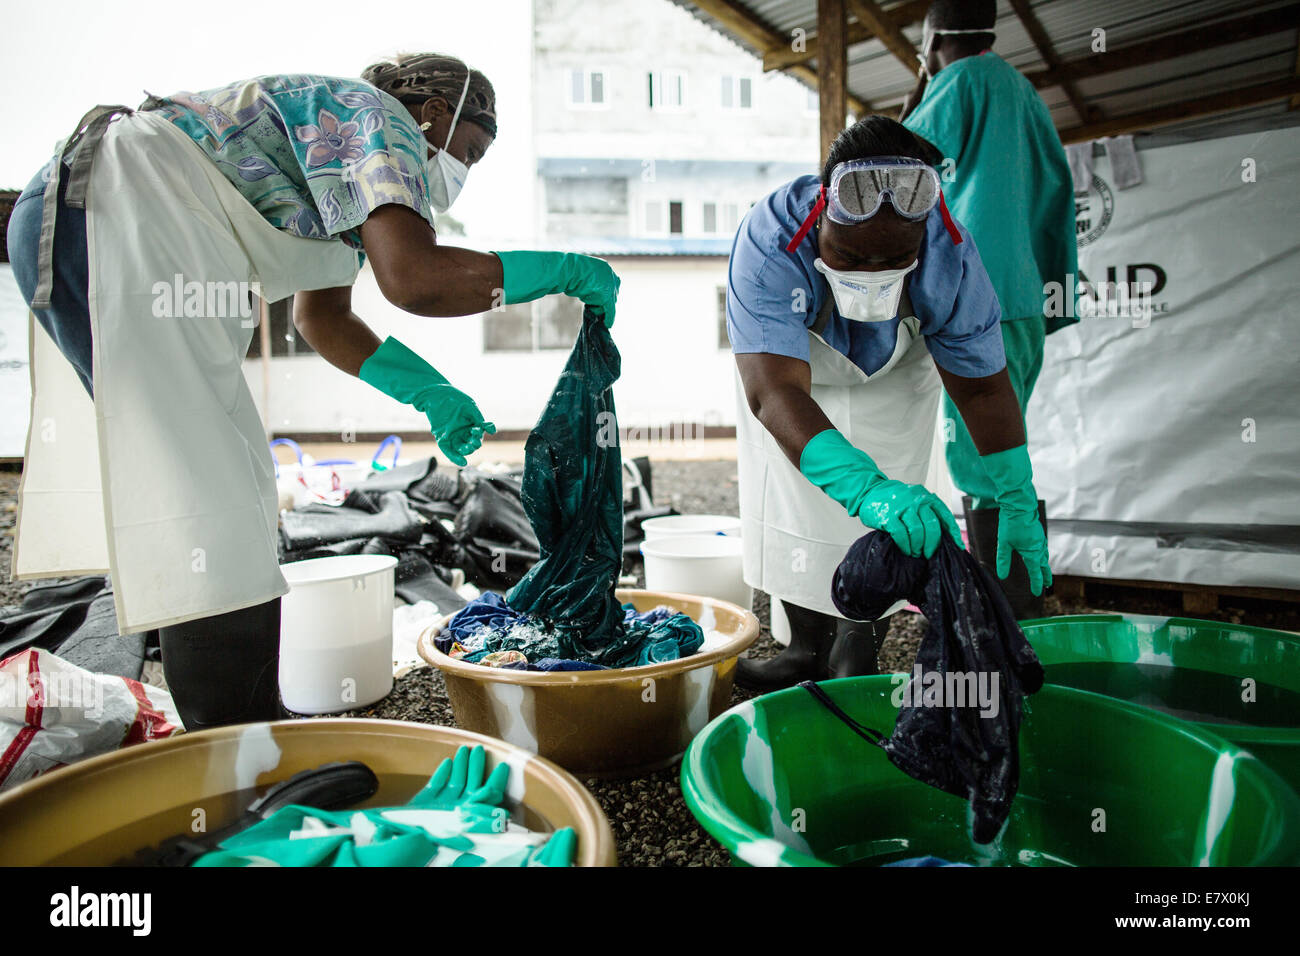 Health workers clean hospital scrubs and protective gear at the newly opened Island Clinic for Ebola treatment September 22, 2014 in Monrovia, Liberia. The facility opened by the WHO and the Ministry of Health in response to the surge of patients needing an Ebola Treatment. Stock Photo